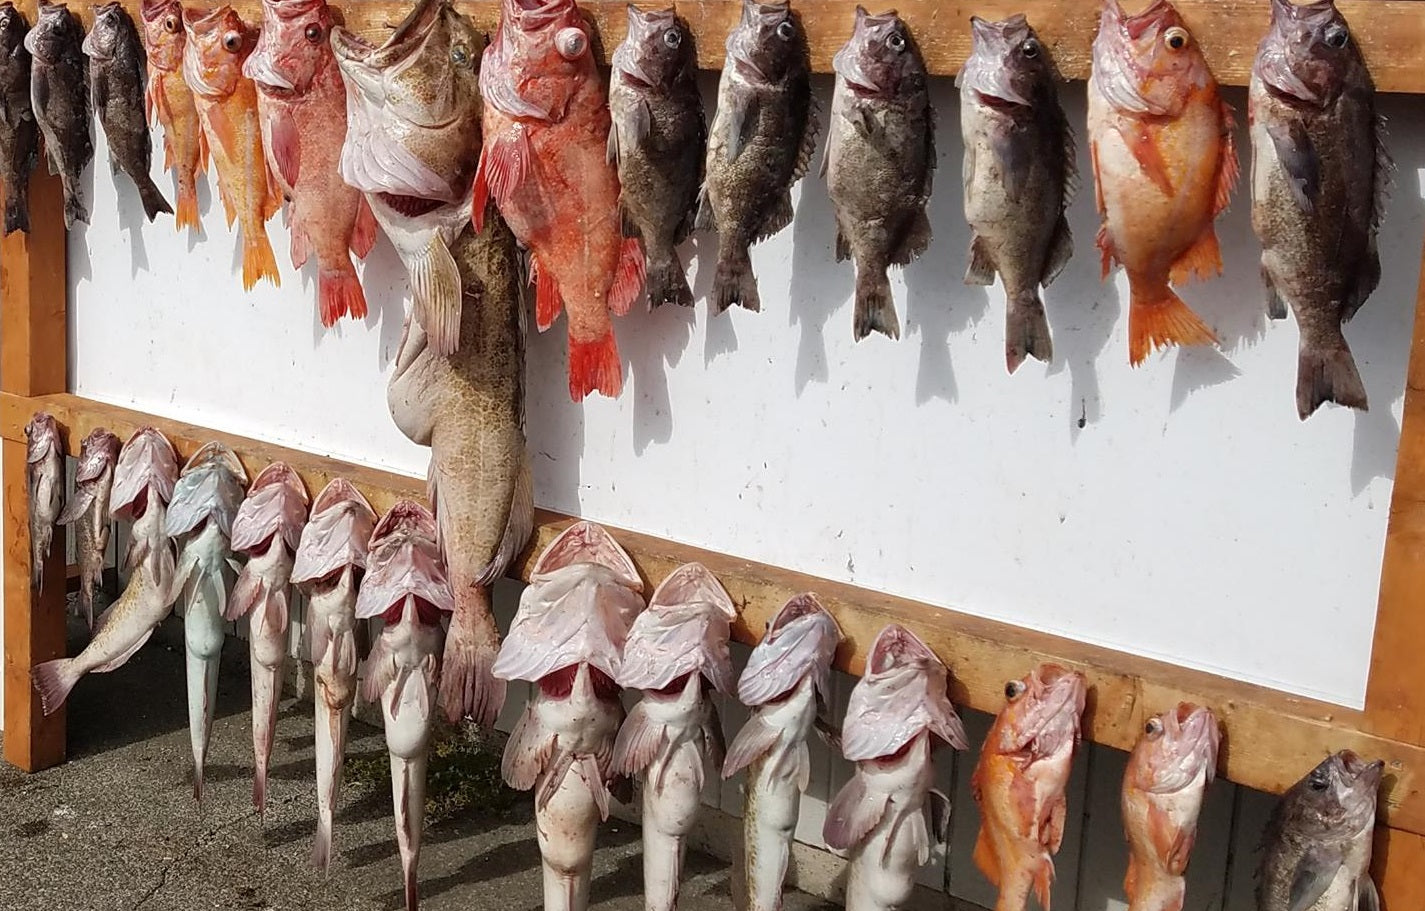 Rockfish and lingcod caught and hung for display